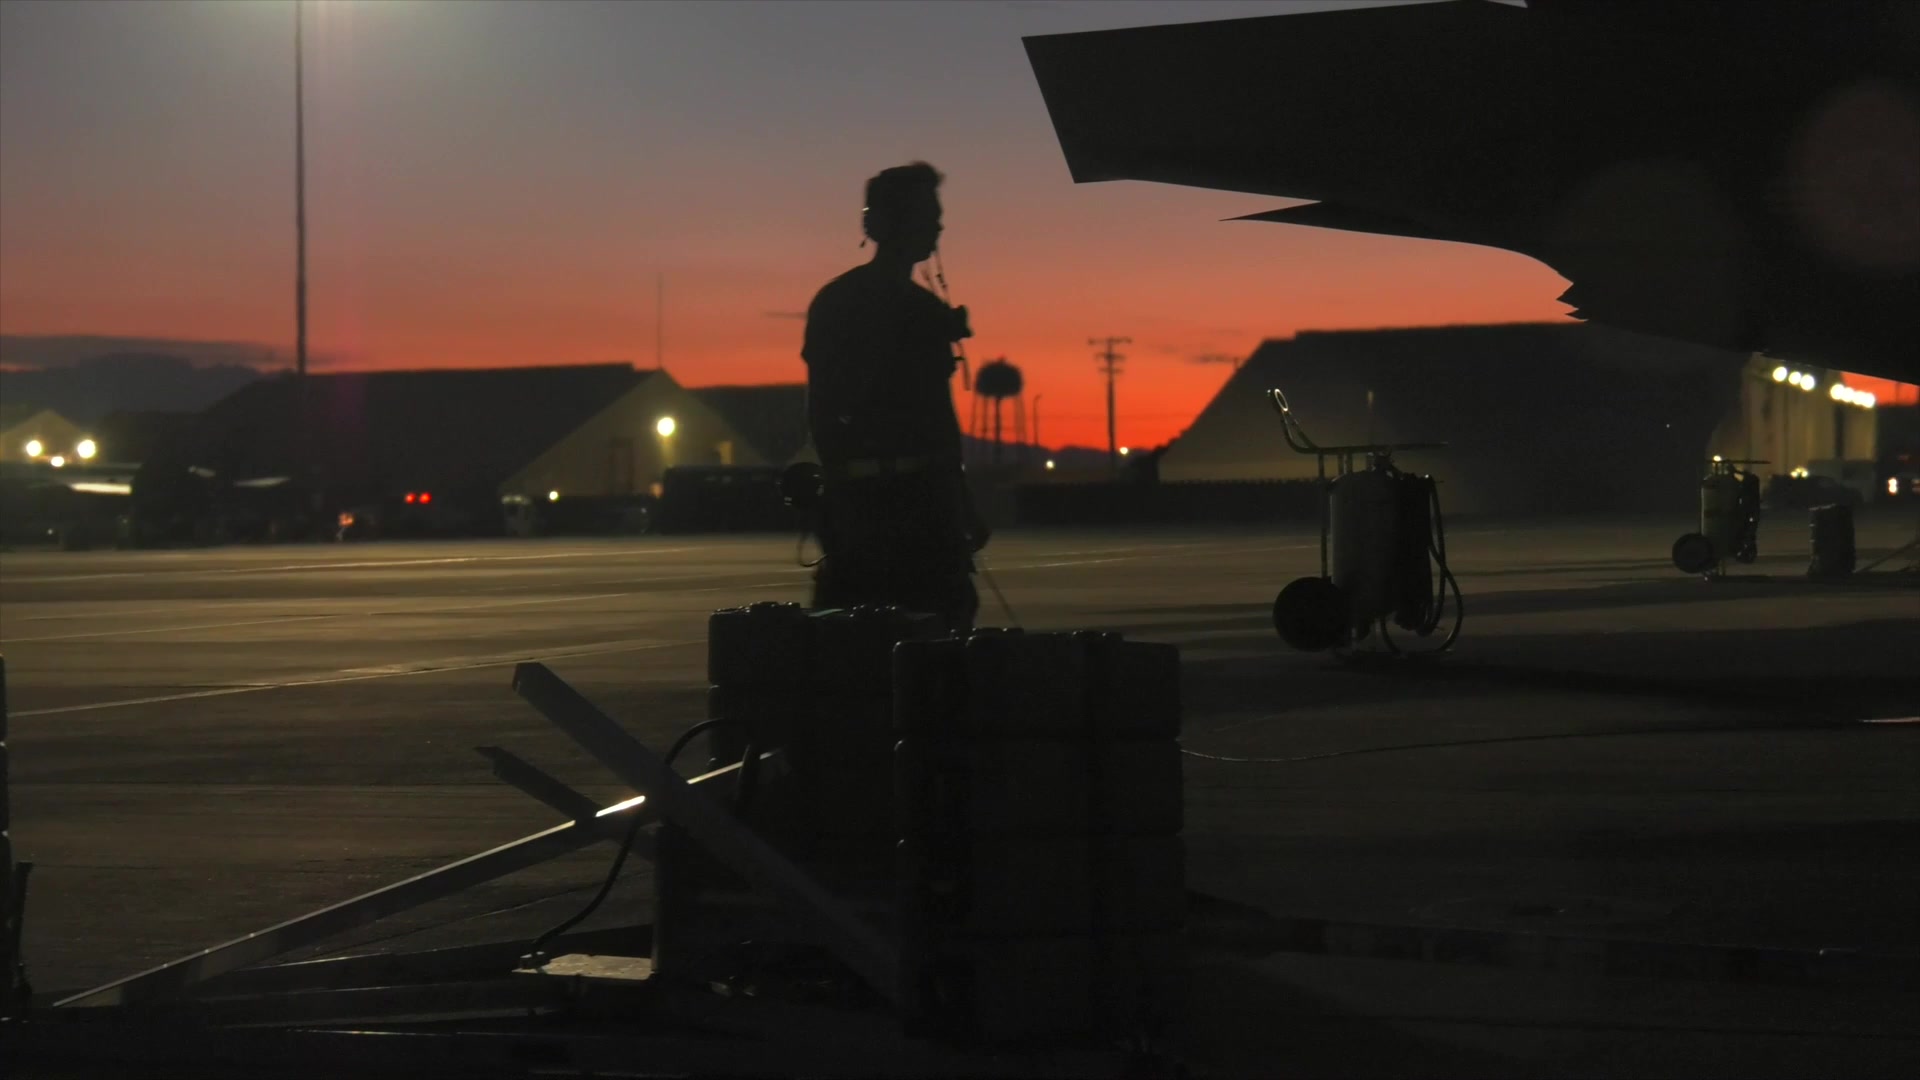 For this month's On Drill, we welcomed back our Green Mountain Boys from Red Flag. Take a glimpse into what it takes to move aircraft, equipment, and hundreds of Airmen in preparation for an exercise of this scale.